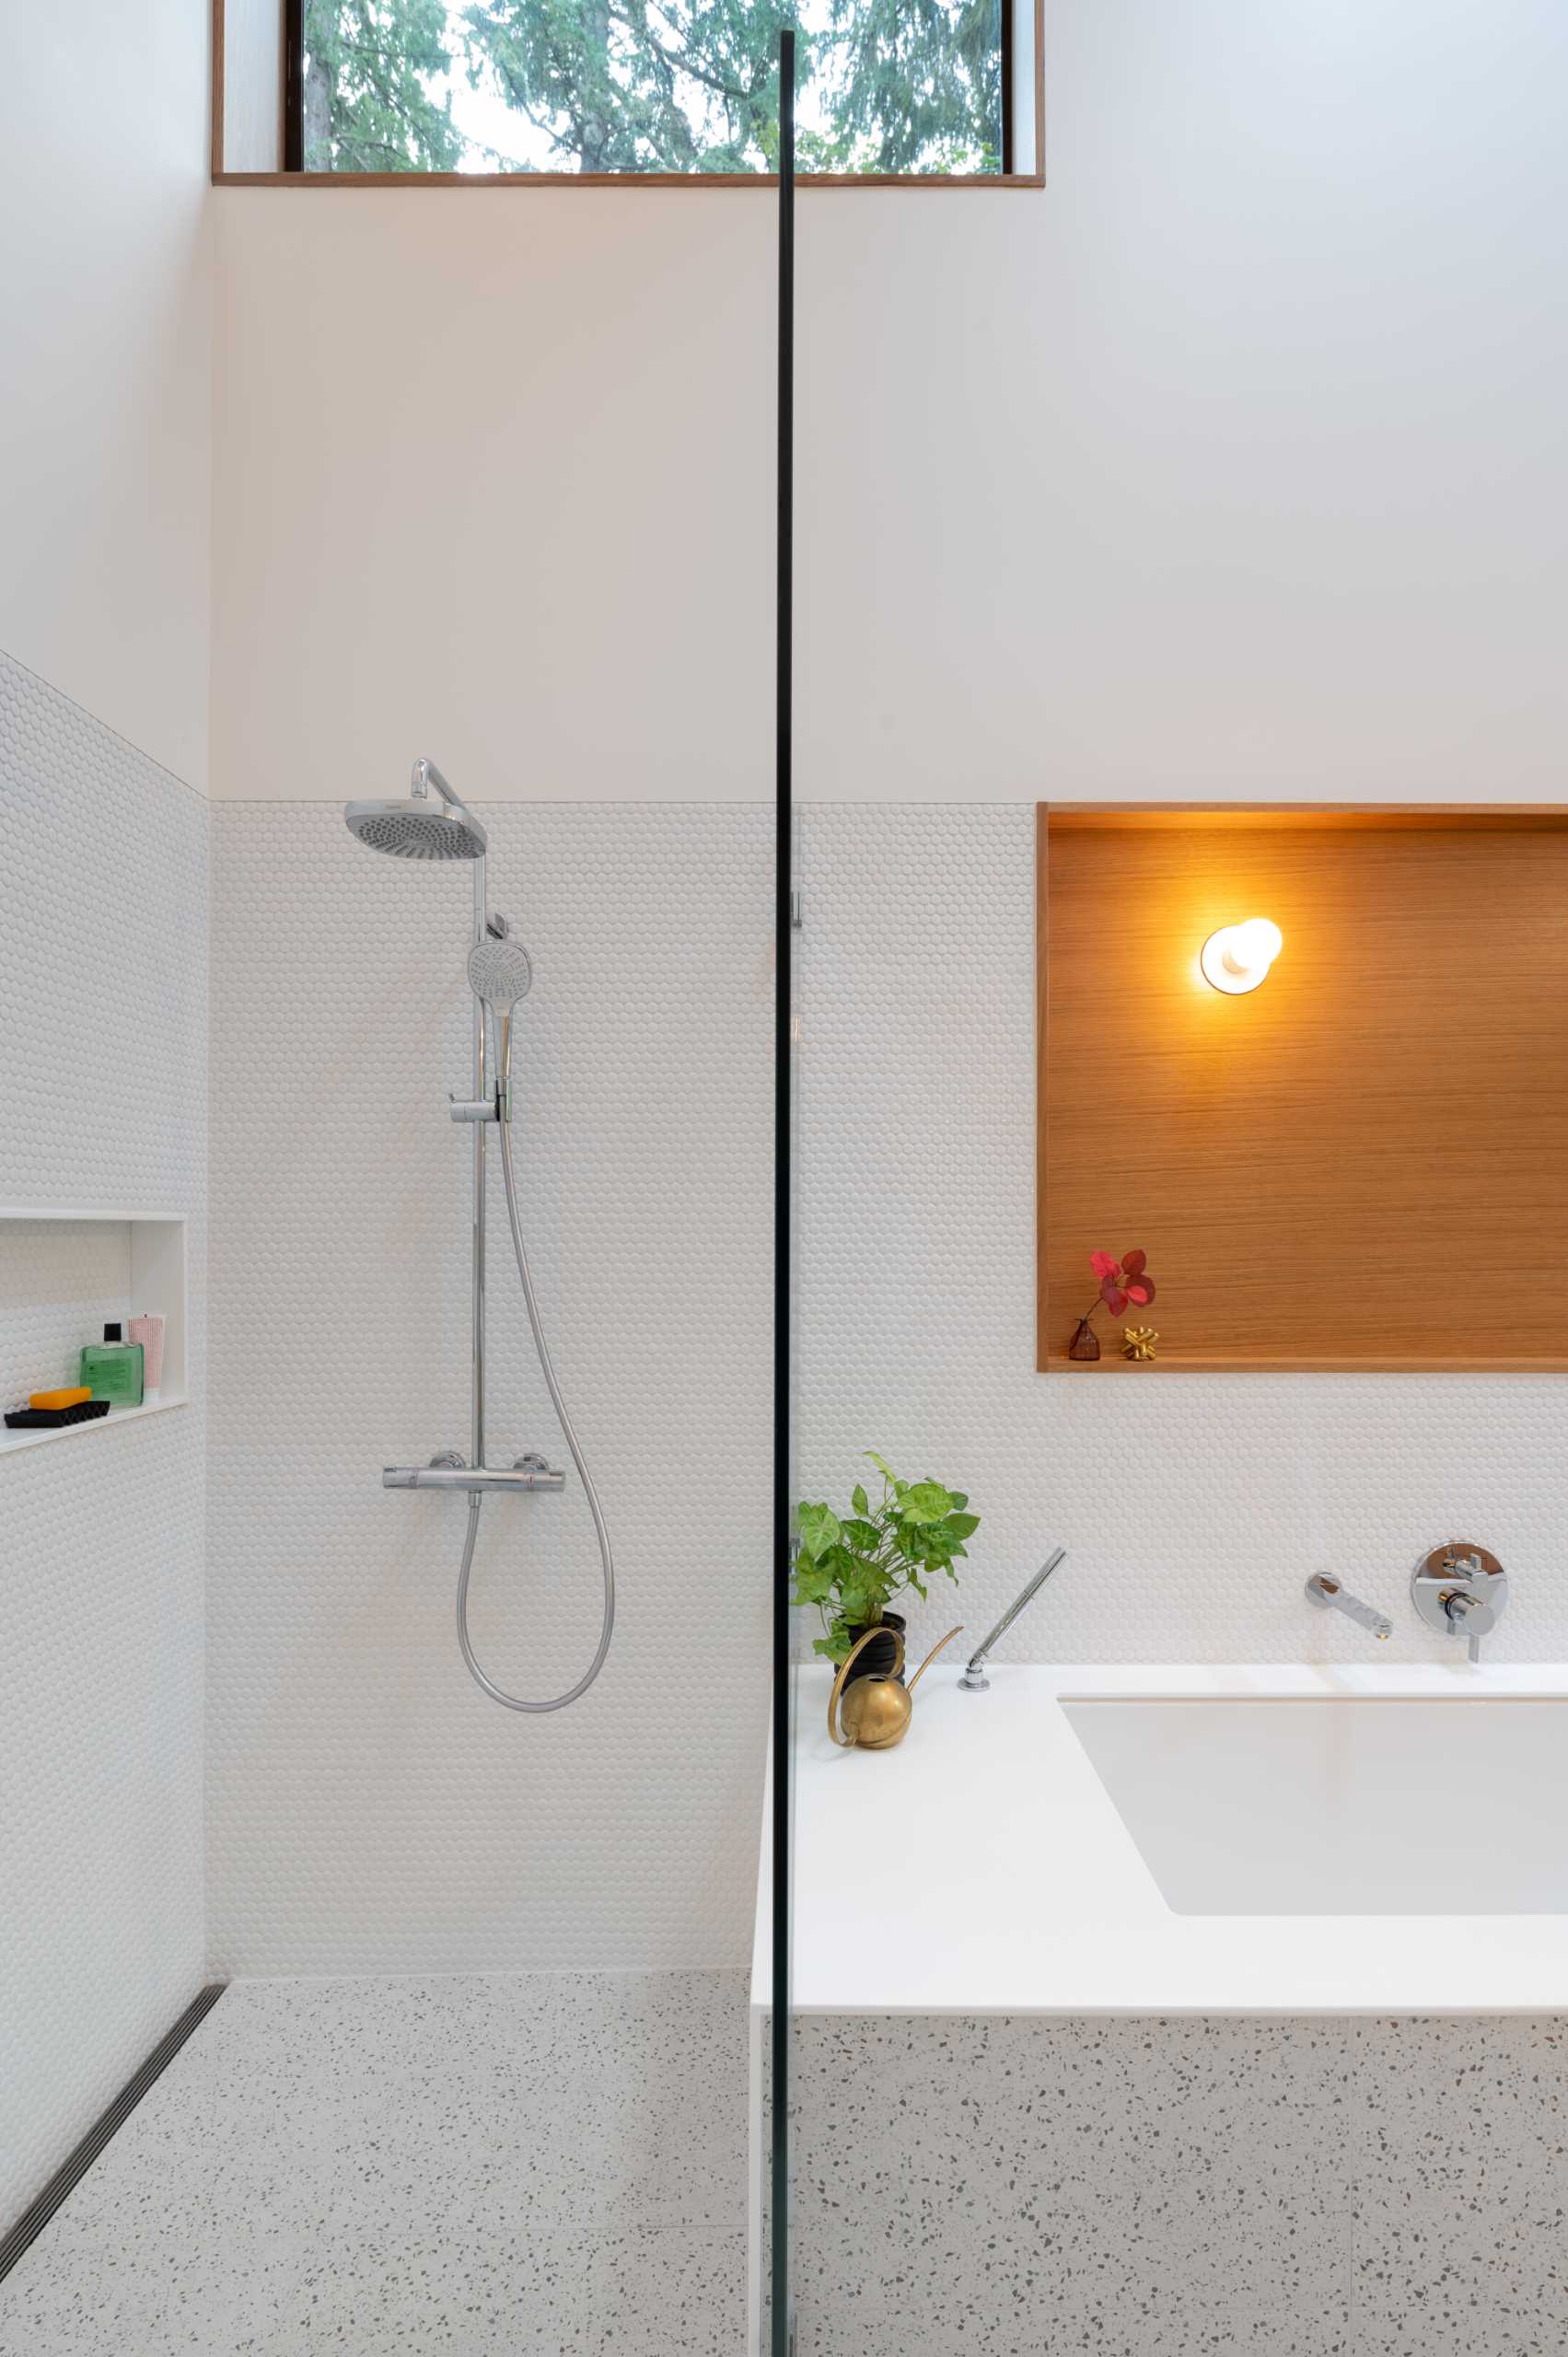 A modern bathroom with walls covered in white penny tiles, a built-in bathtub, and a walk-in shower with a shelving niche.